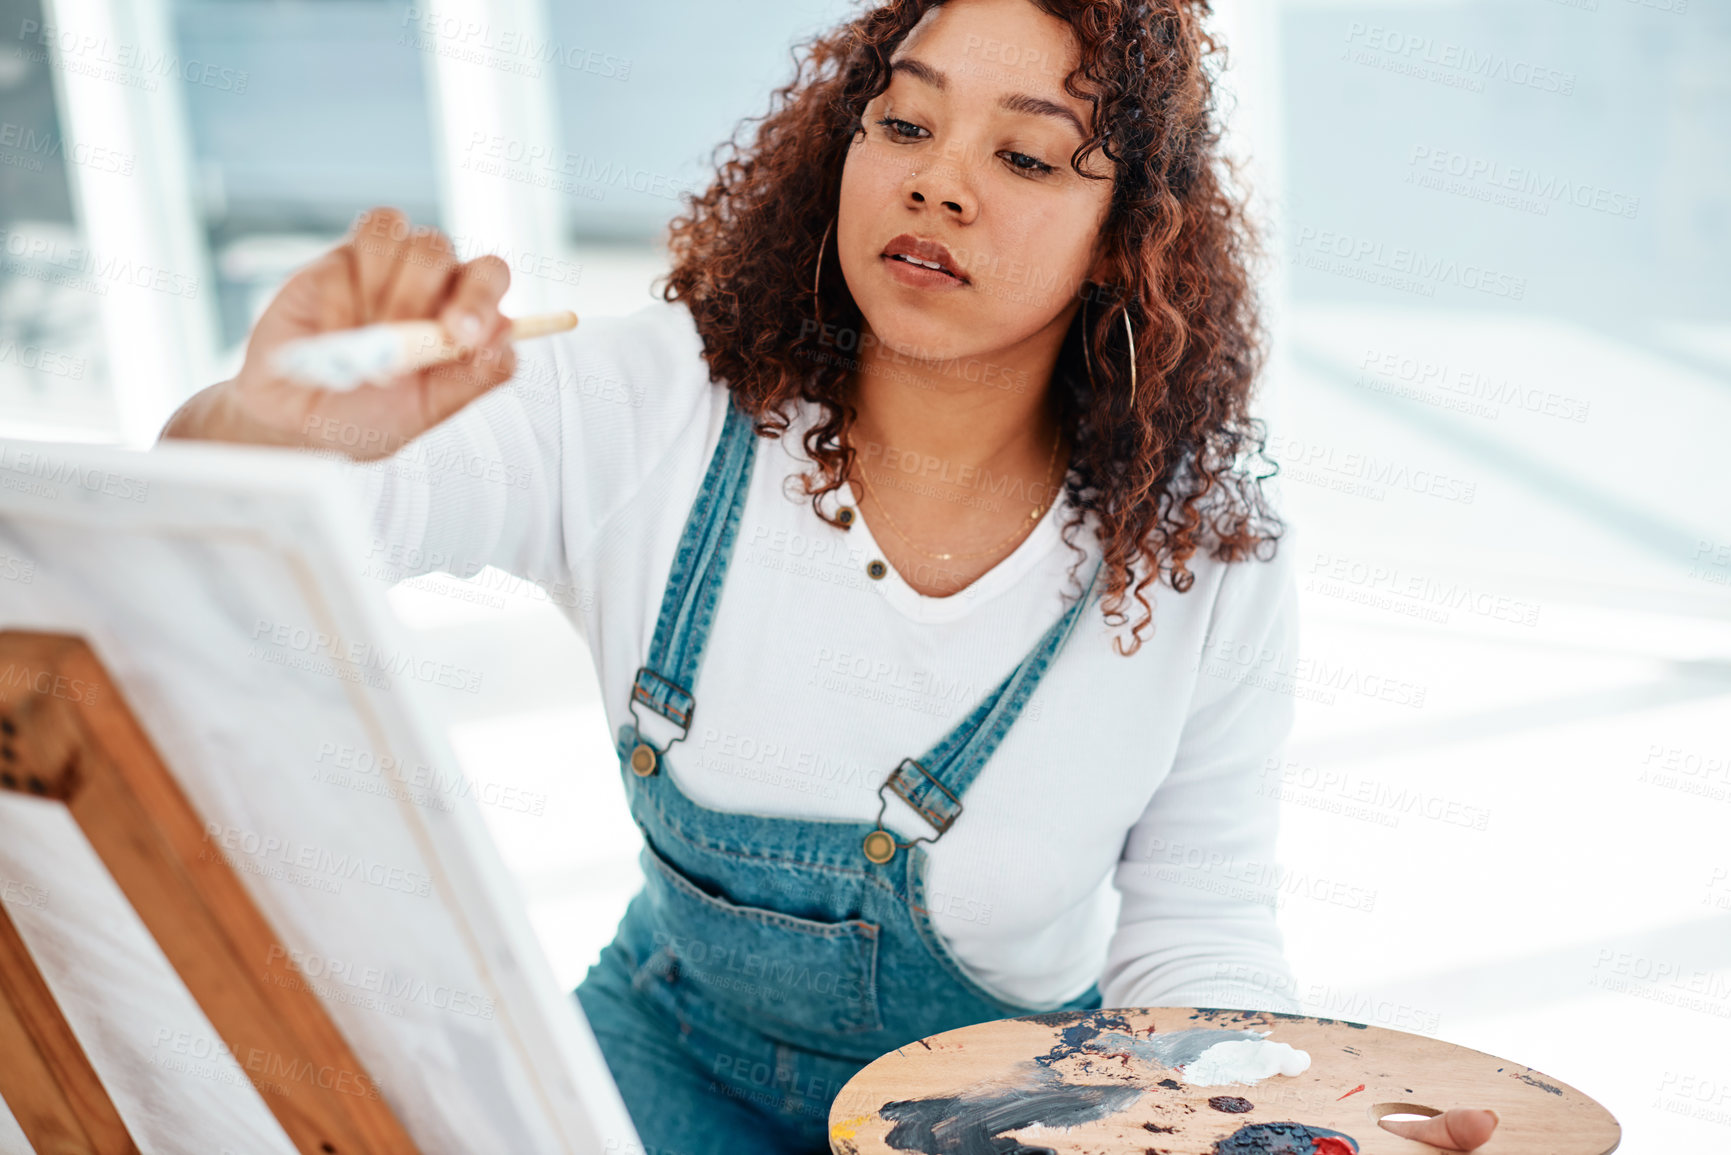 Buy stock photo Cropped shot of an attractive young artist sitting alone and painting during an art class in the studio